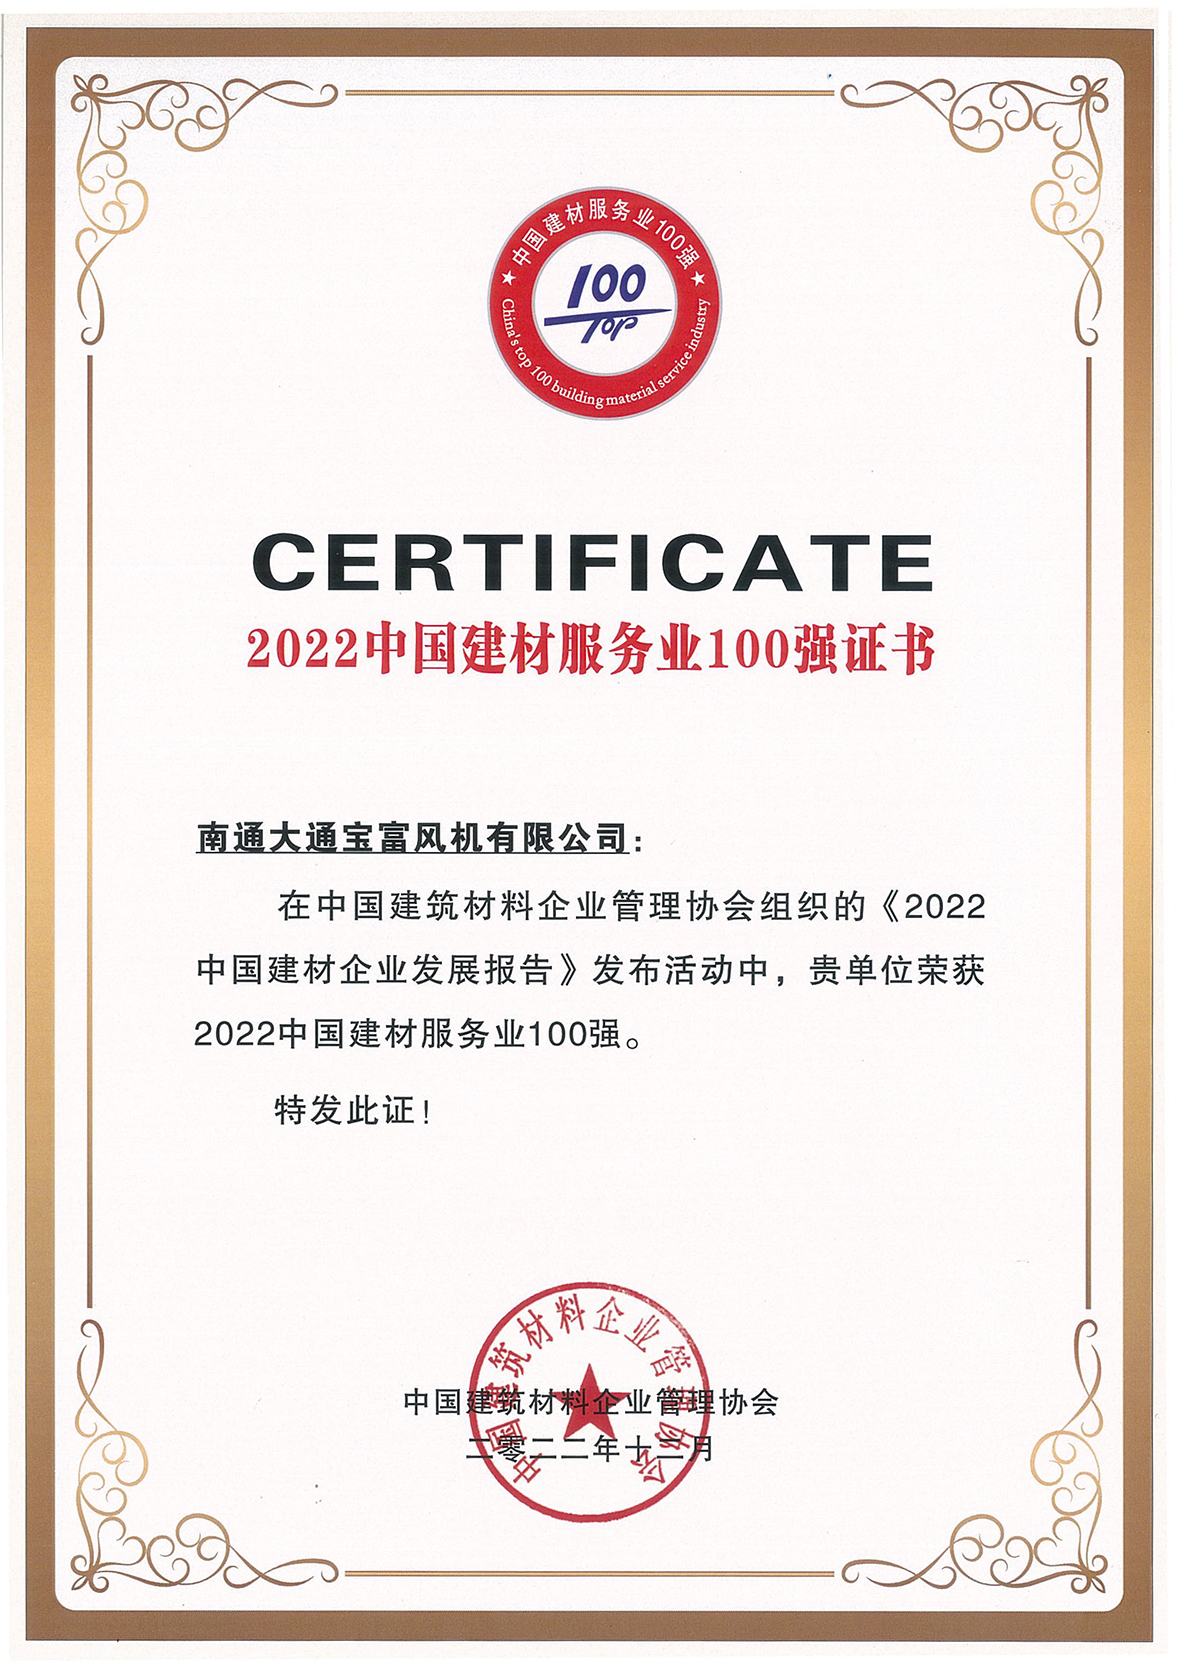 2022 China Building Materials Service Industry Top 100